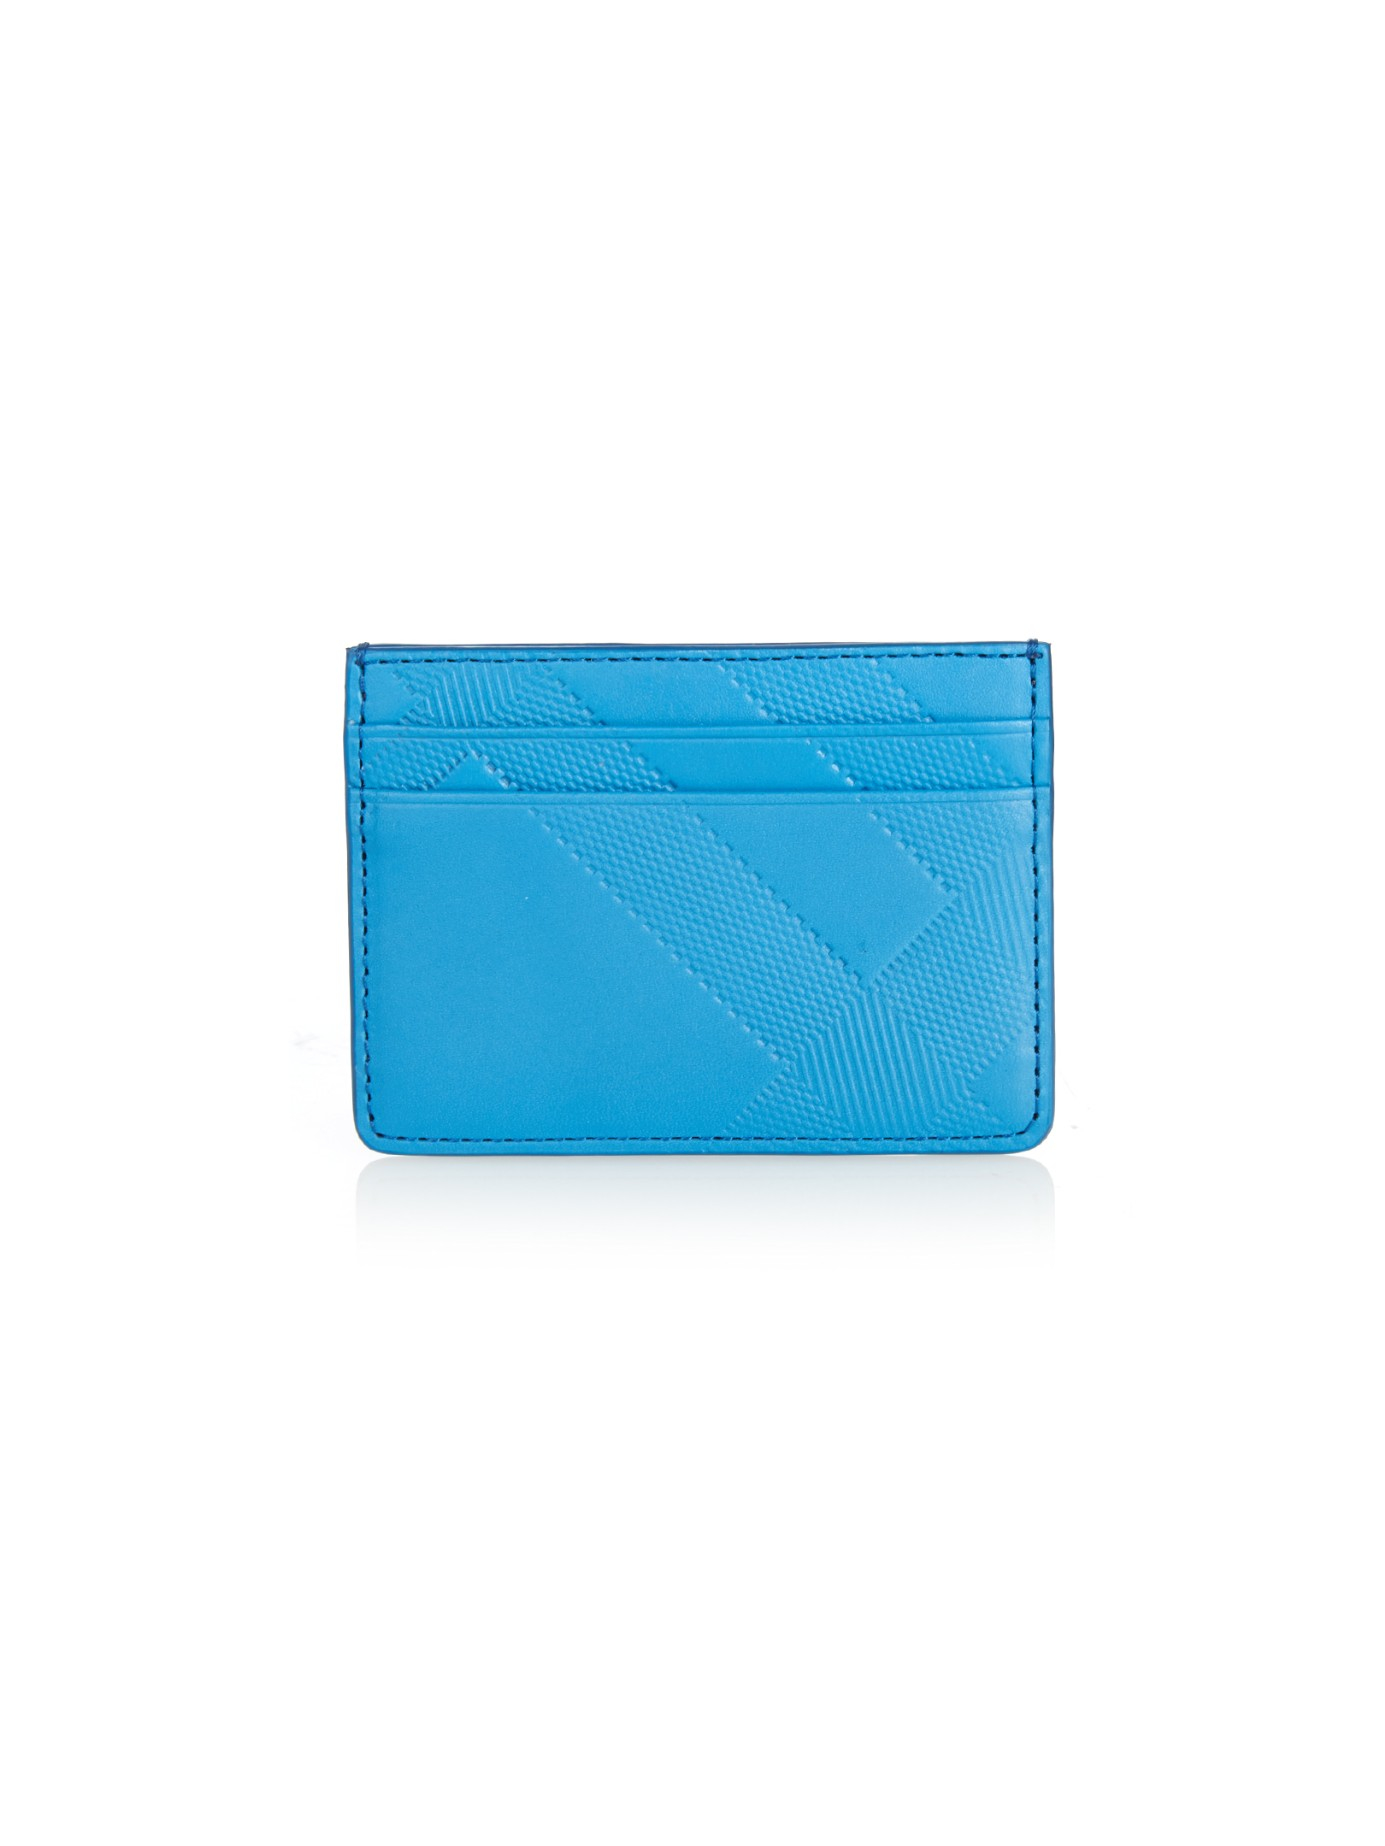 Burberry Check-Embossed Leather Cardholder in Blue for Men - Lyst